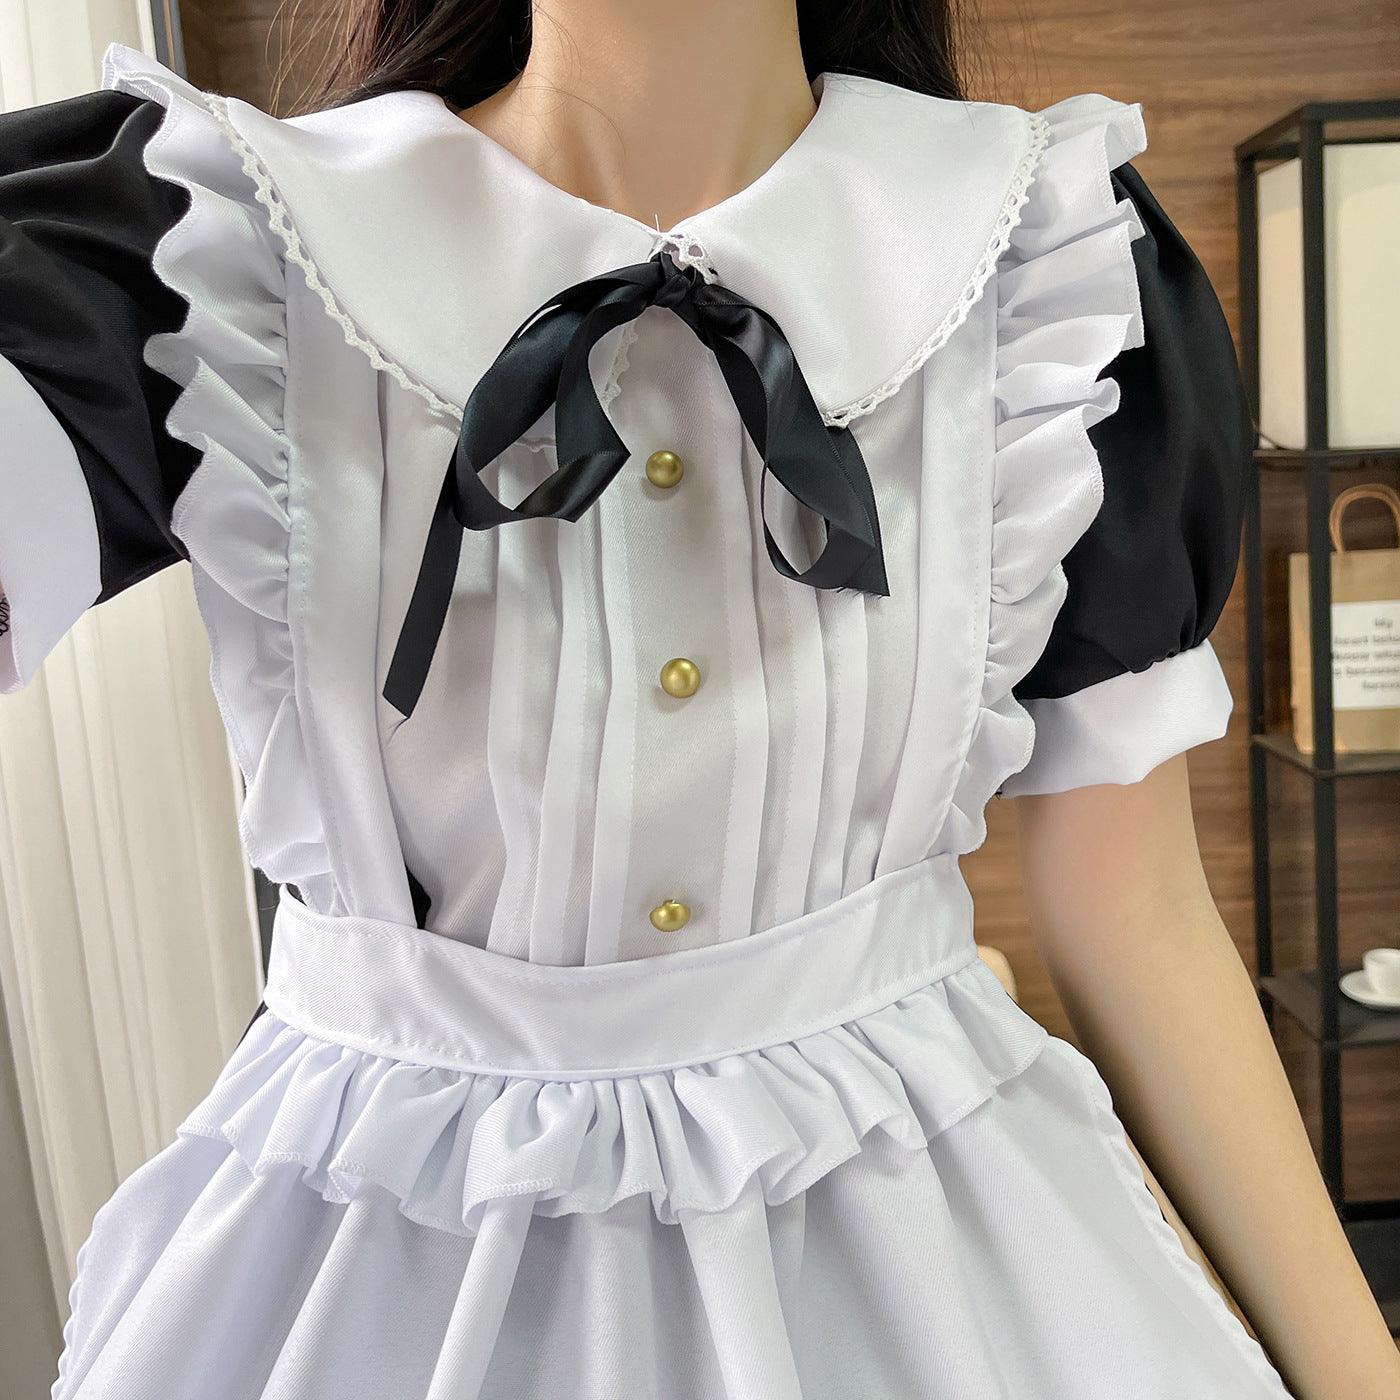 Traditional Short Sleeves Maid Outfit Lolita Dress Crossdresser CD Fancy Cosplay Costume